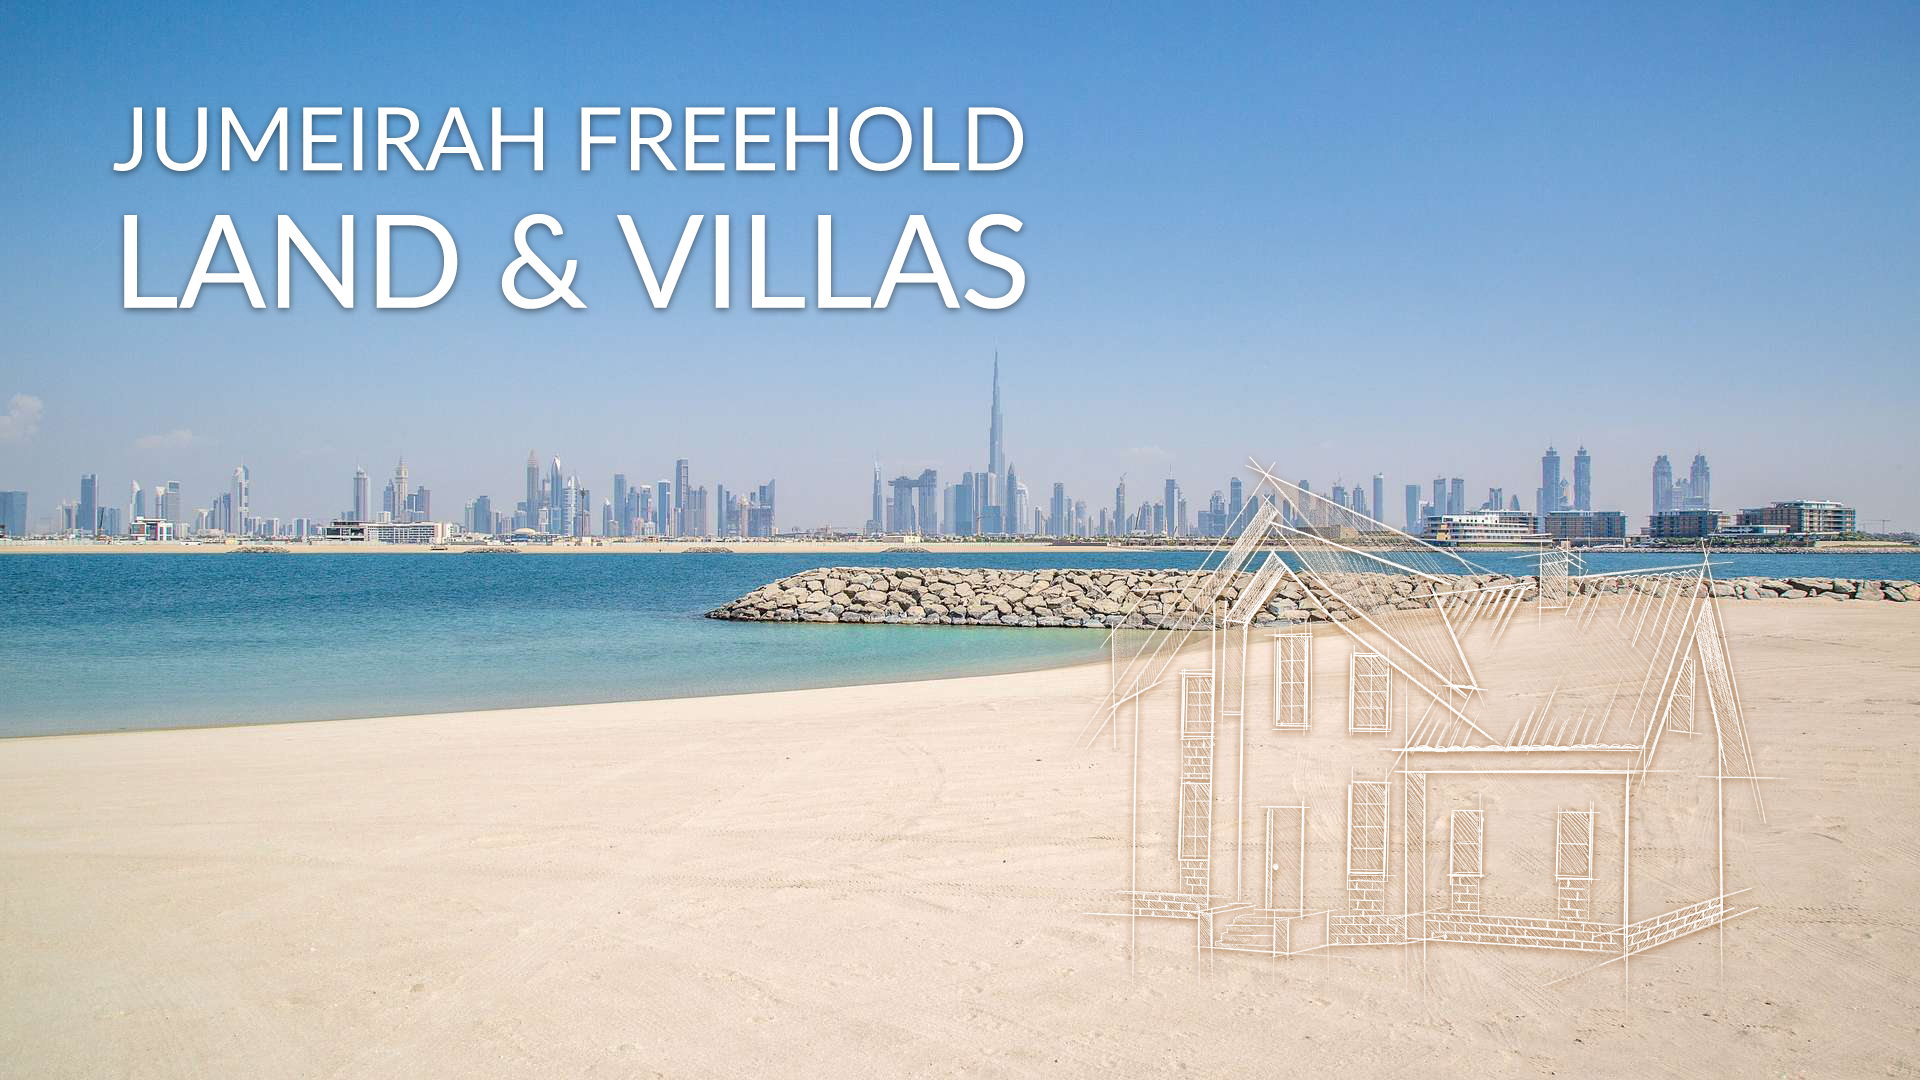 Jumeirah freehold land and villas now available to Expats